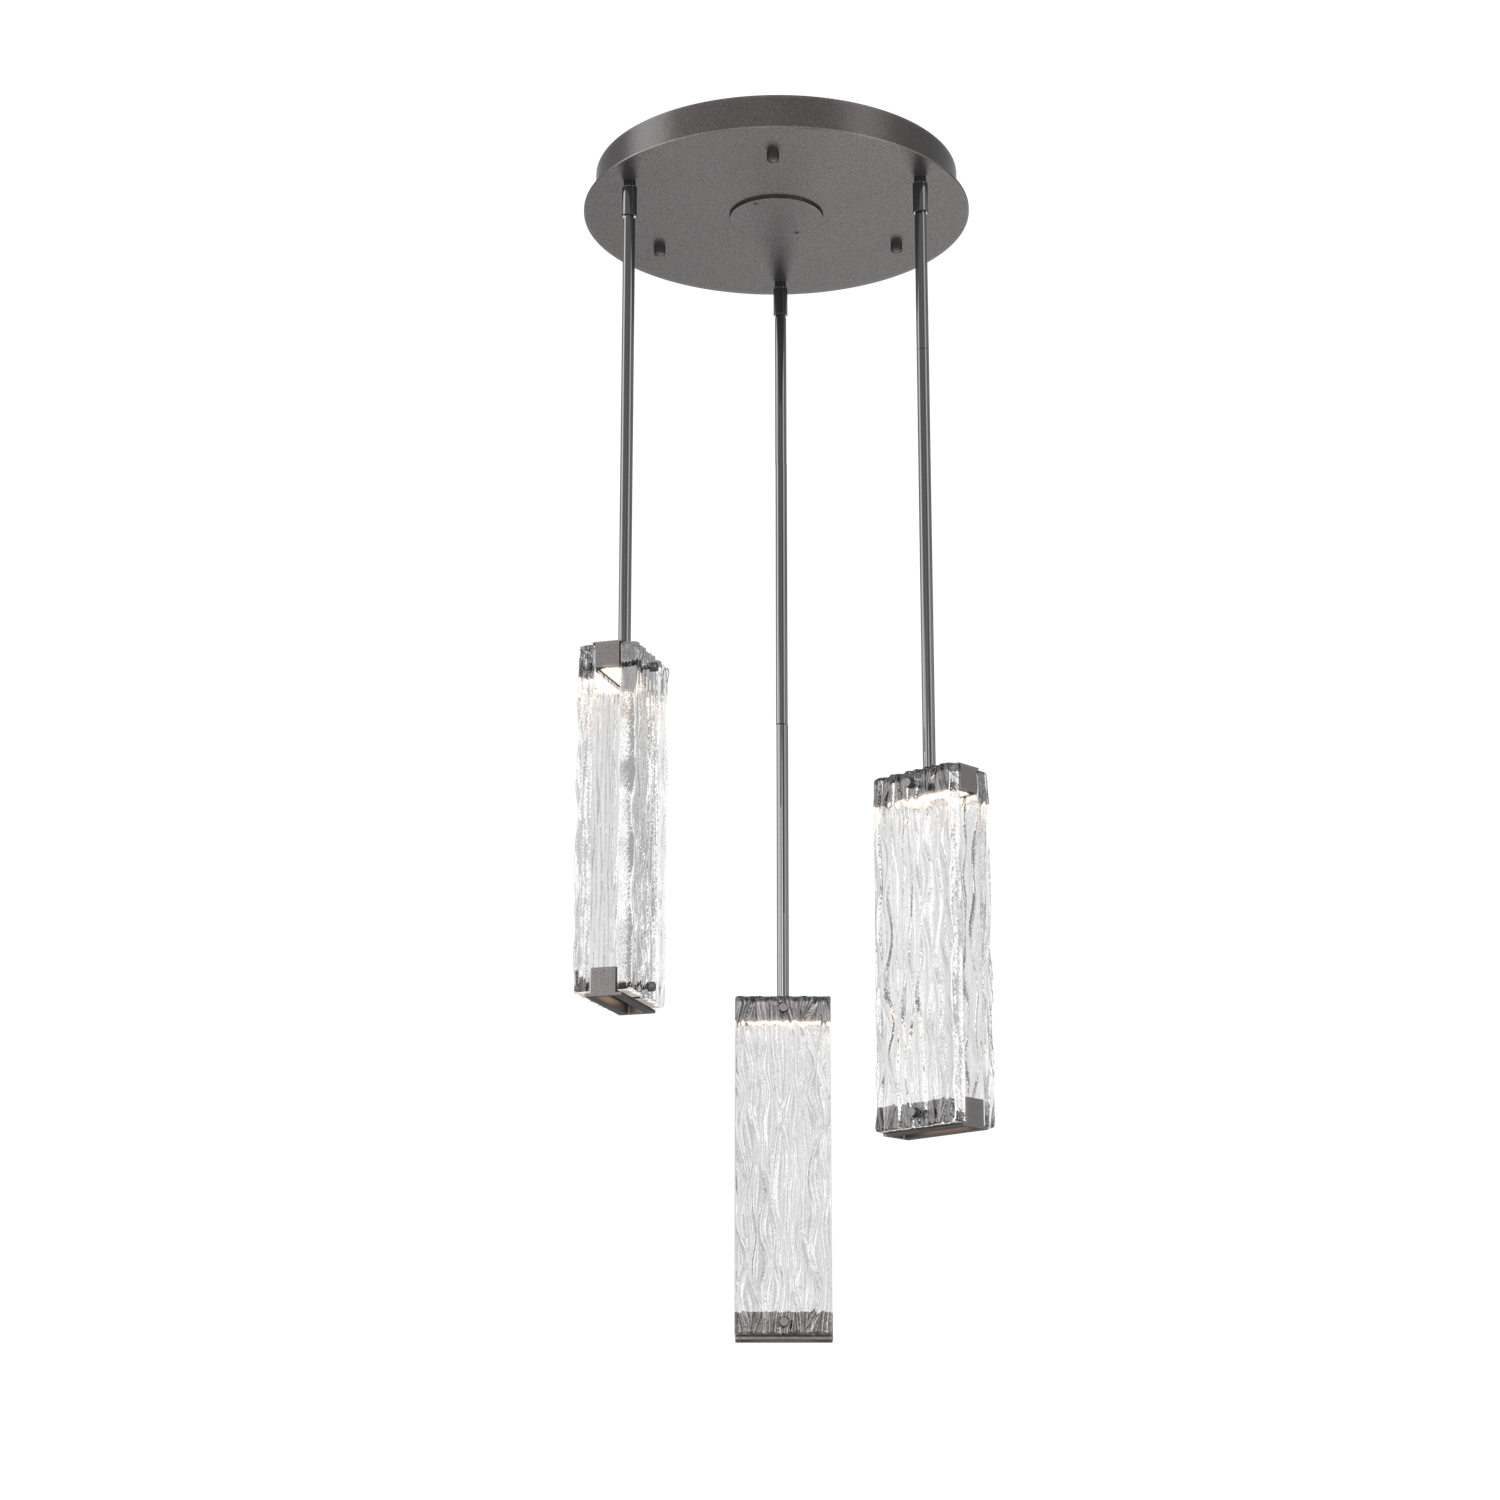 CHB0090-03-GP-TT-Hammerton-Studio-Tabulo-3-light-multi-pendant-chandelier-with-graphite-finish-and-clear-tidal-cast-glass-shade-and-LED-lamping